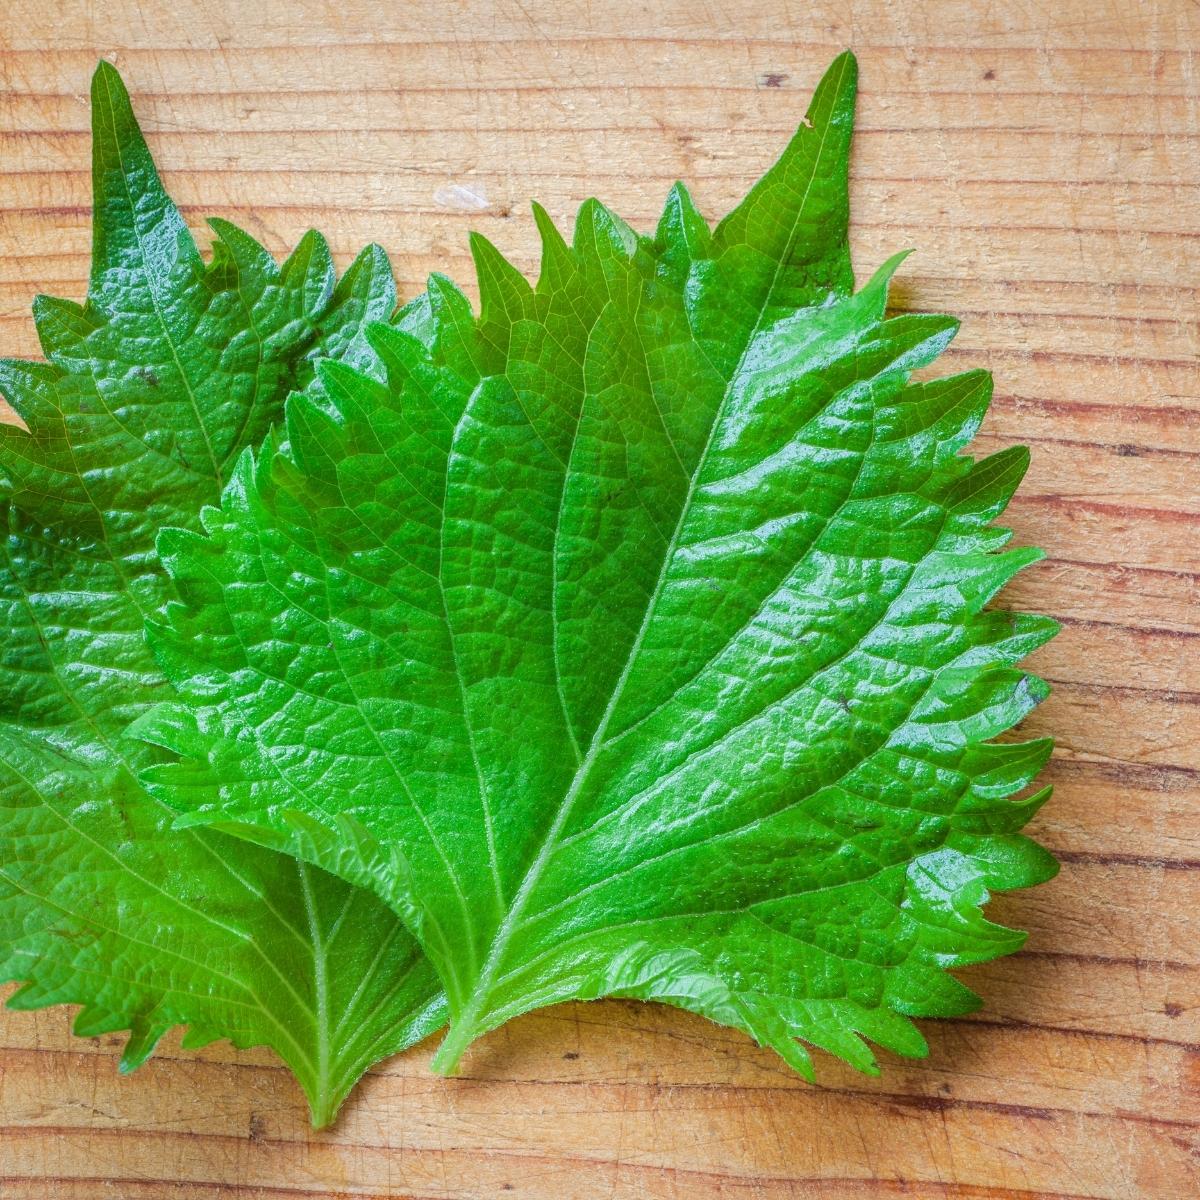 2 green, wide Shiso leaves with serrated edges.